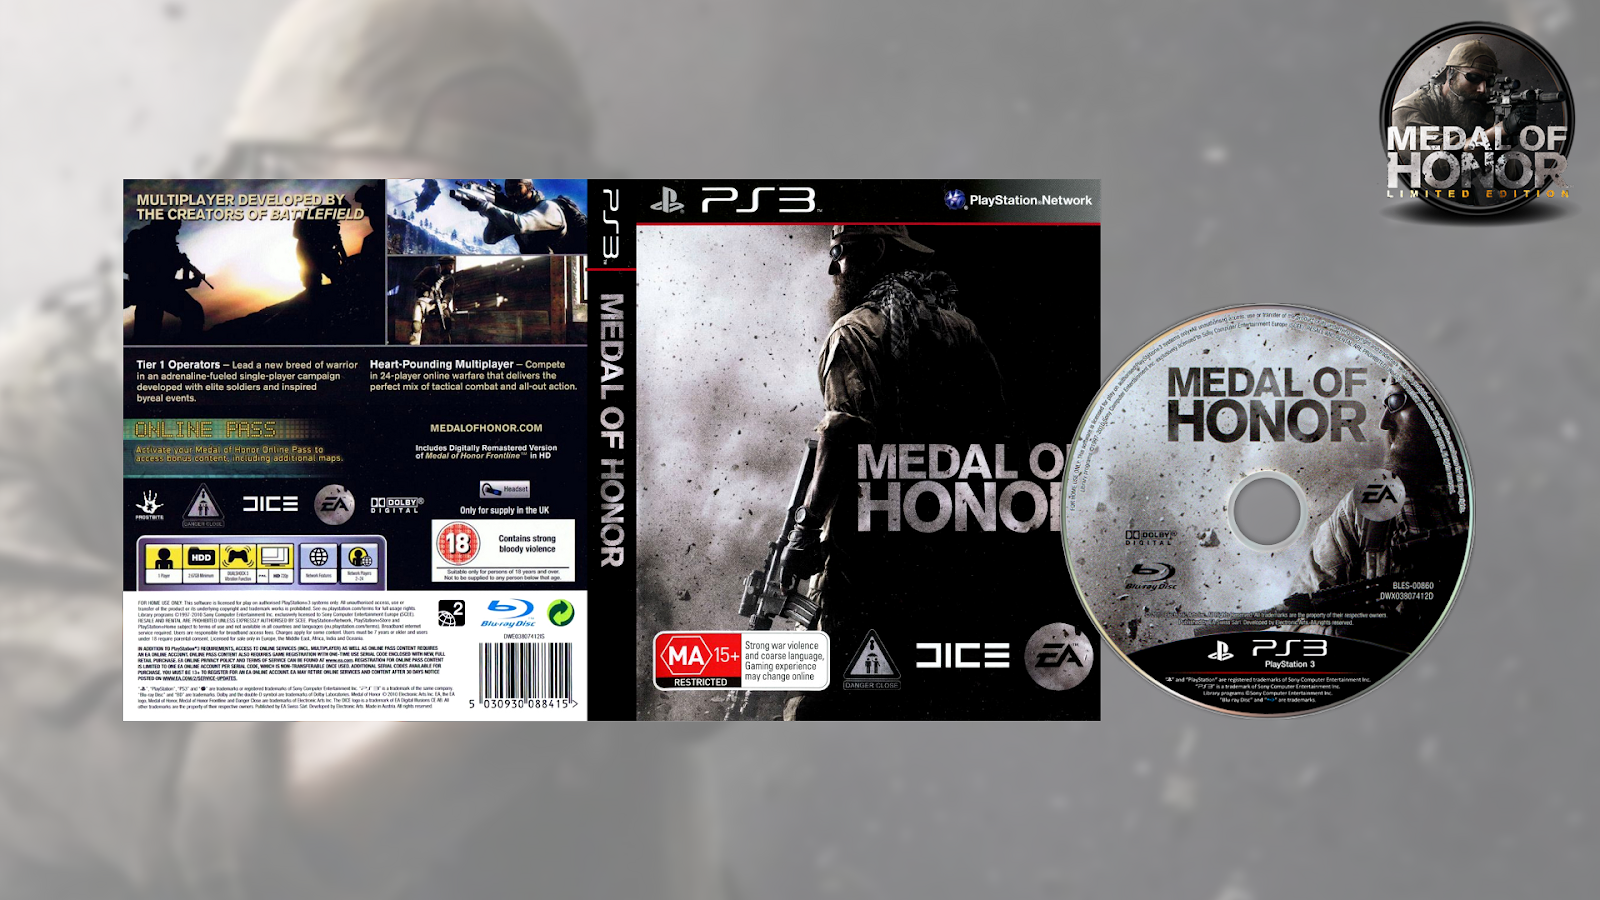 Medal of honor чит. Medal of Honor Limited Edition ps3. Medal of Honor 2010 диск. Medal of Honor ps3 обложка. Медаль за отвагу на ps3.